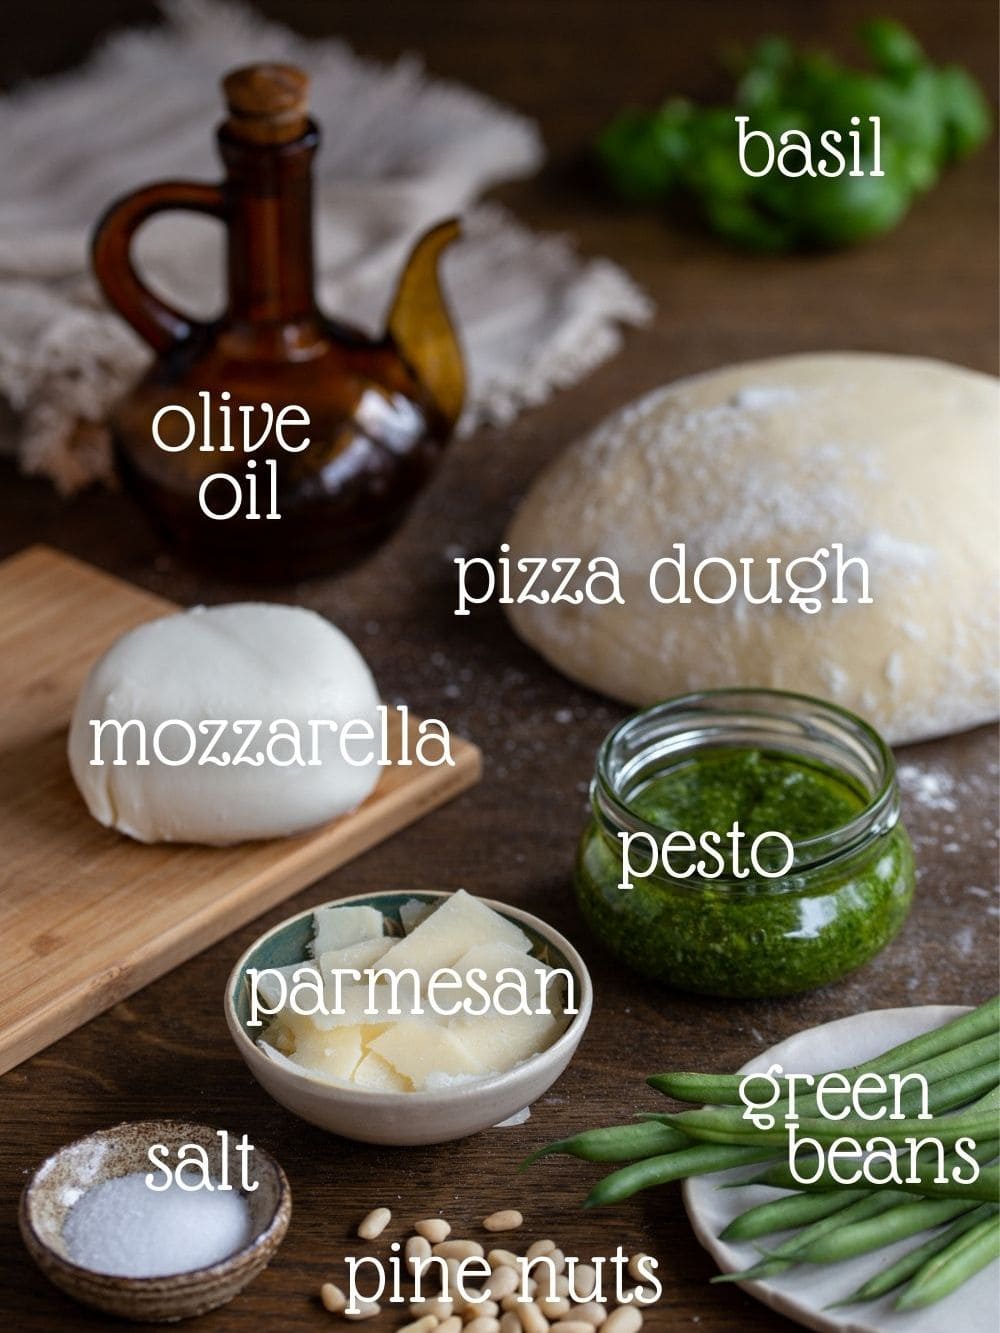 The ingredients needed for the recipe.